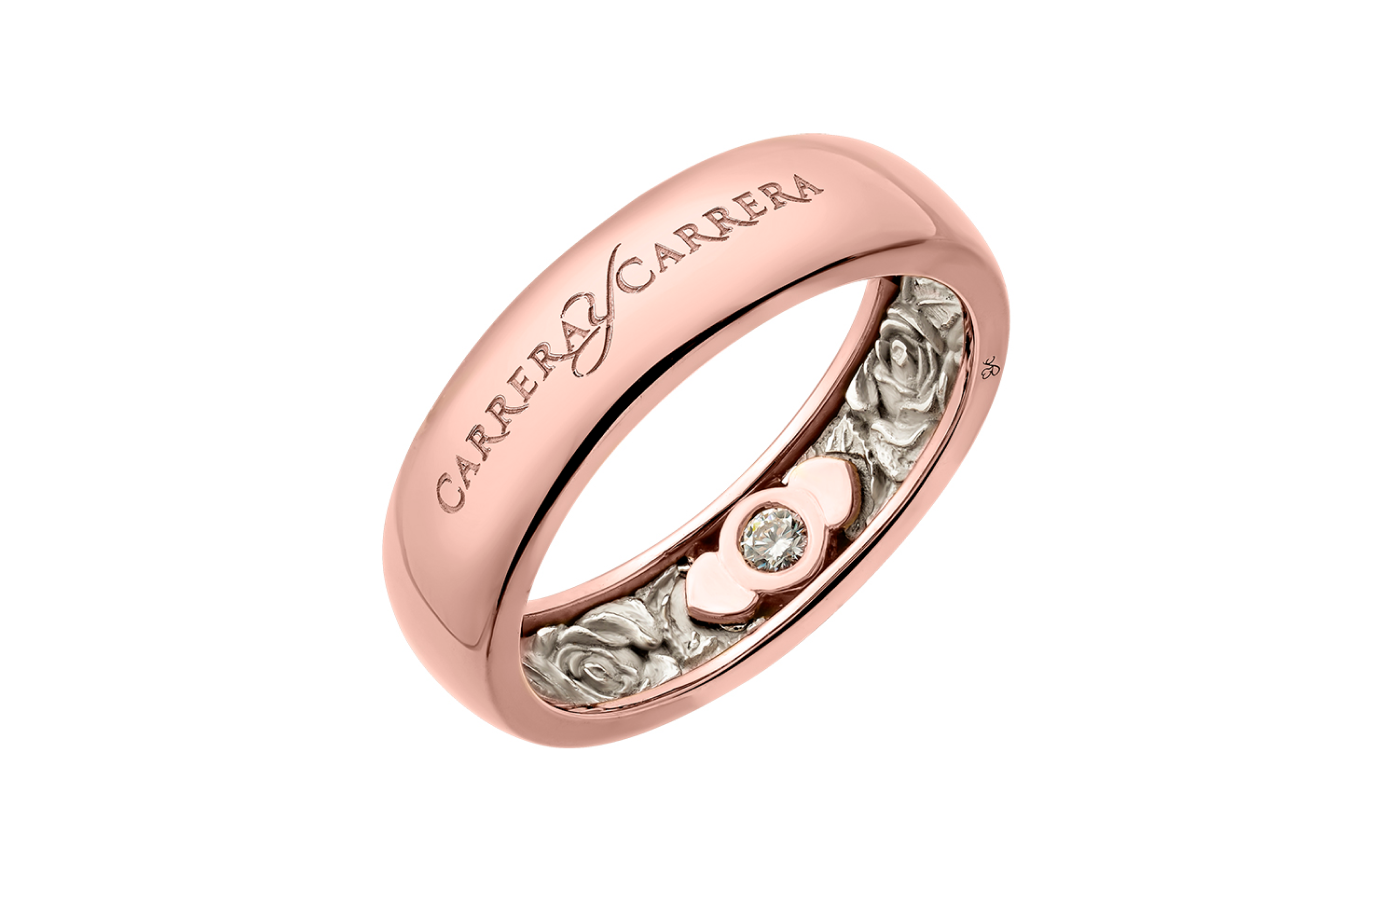 Carrera Y Carrera Beauty Inside ring in white gold, rose gold and diamond from the Infinito collection